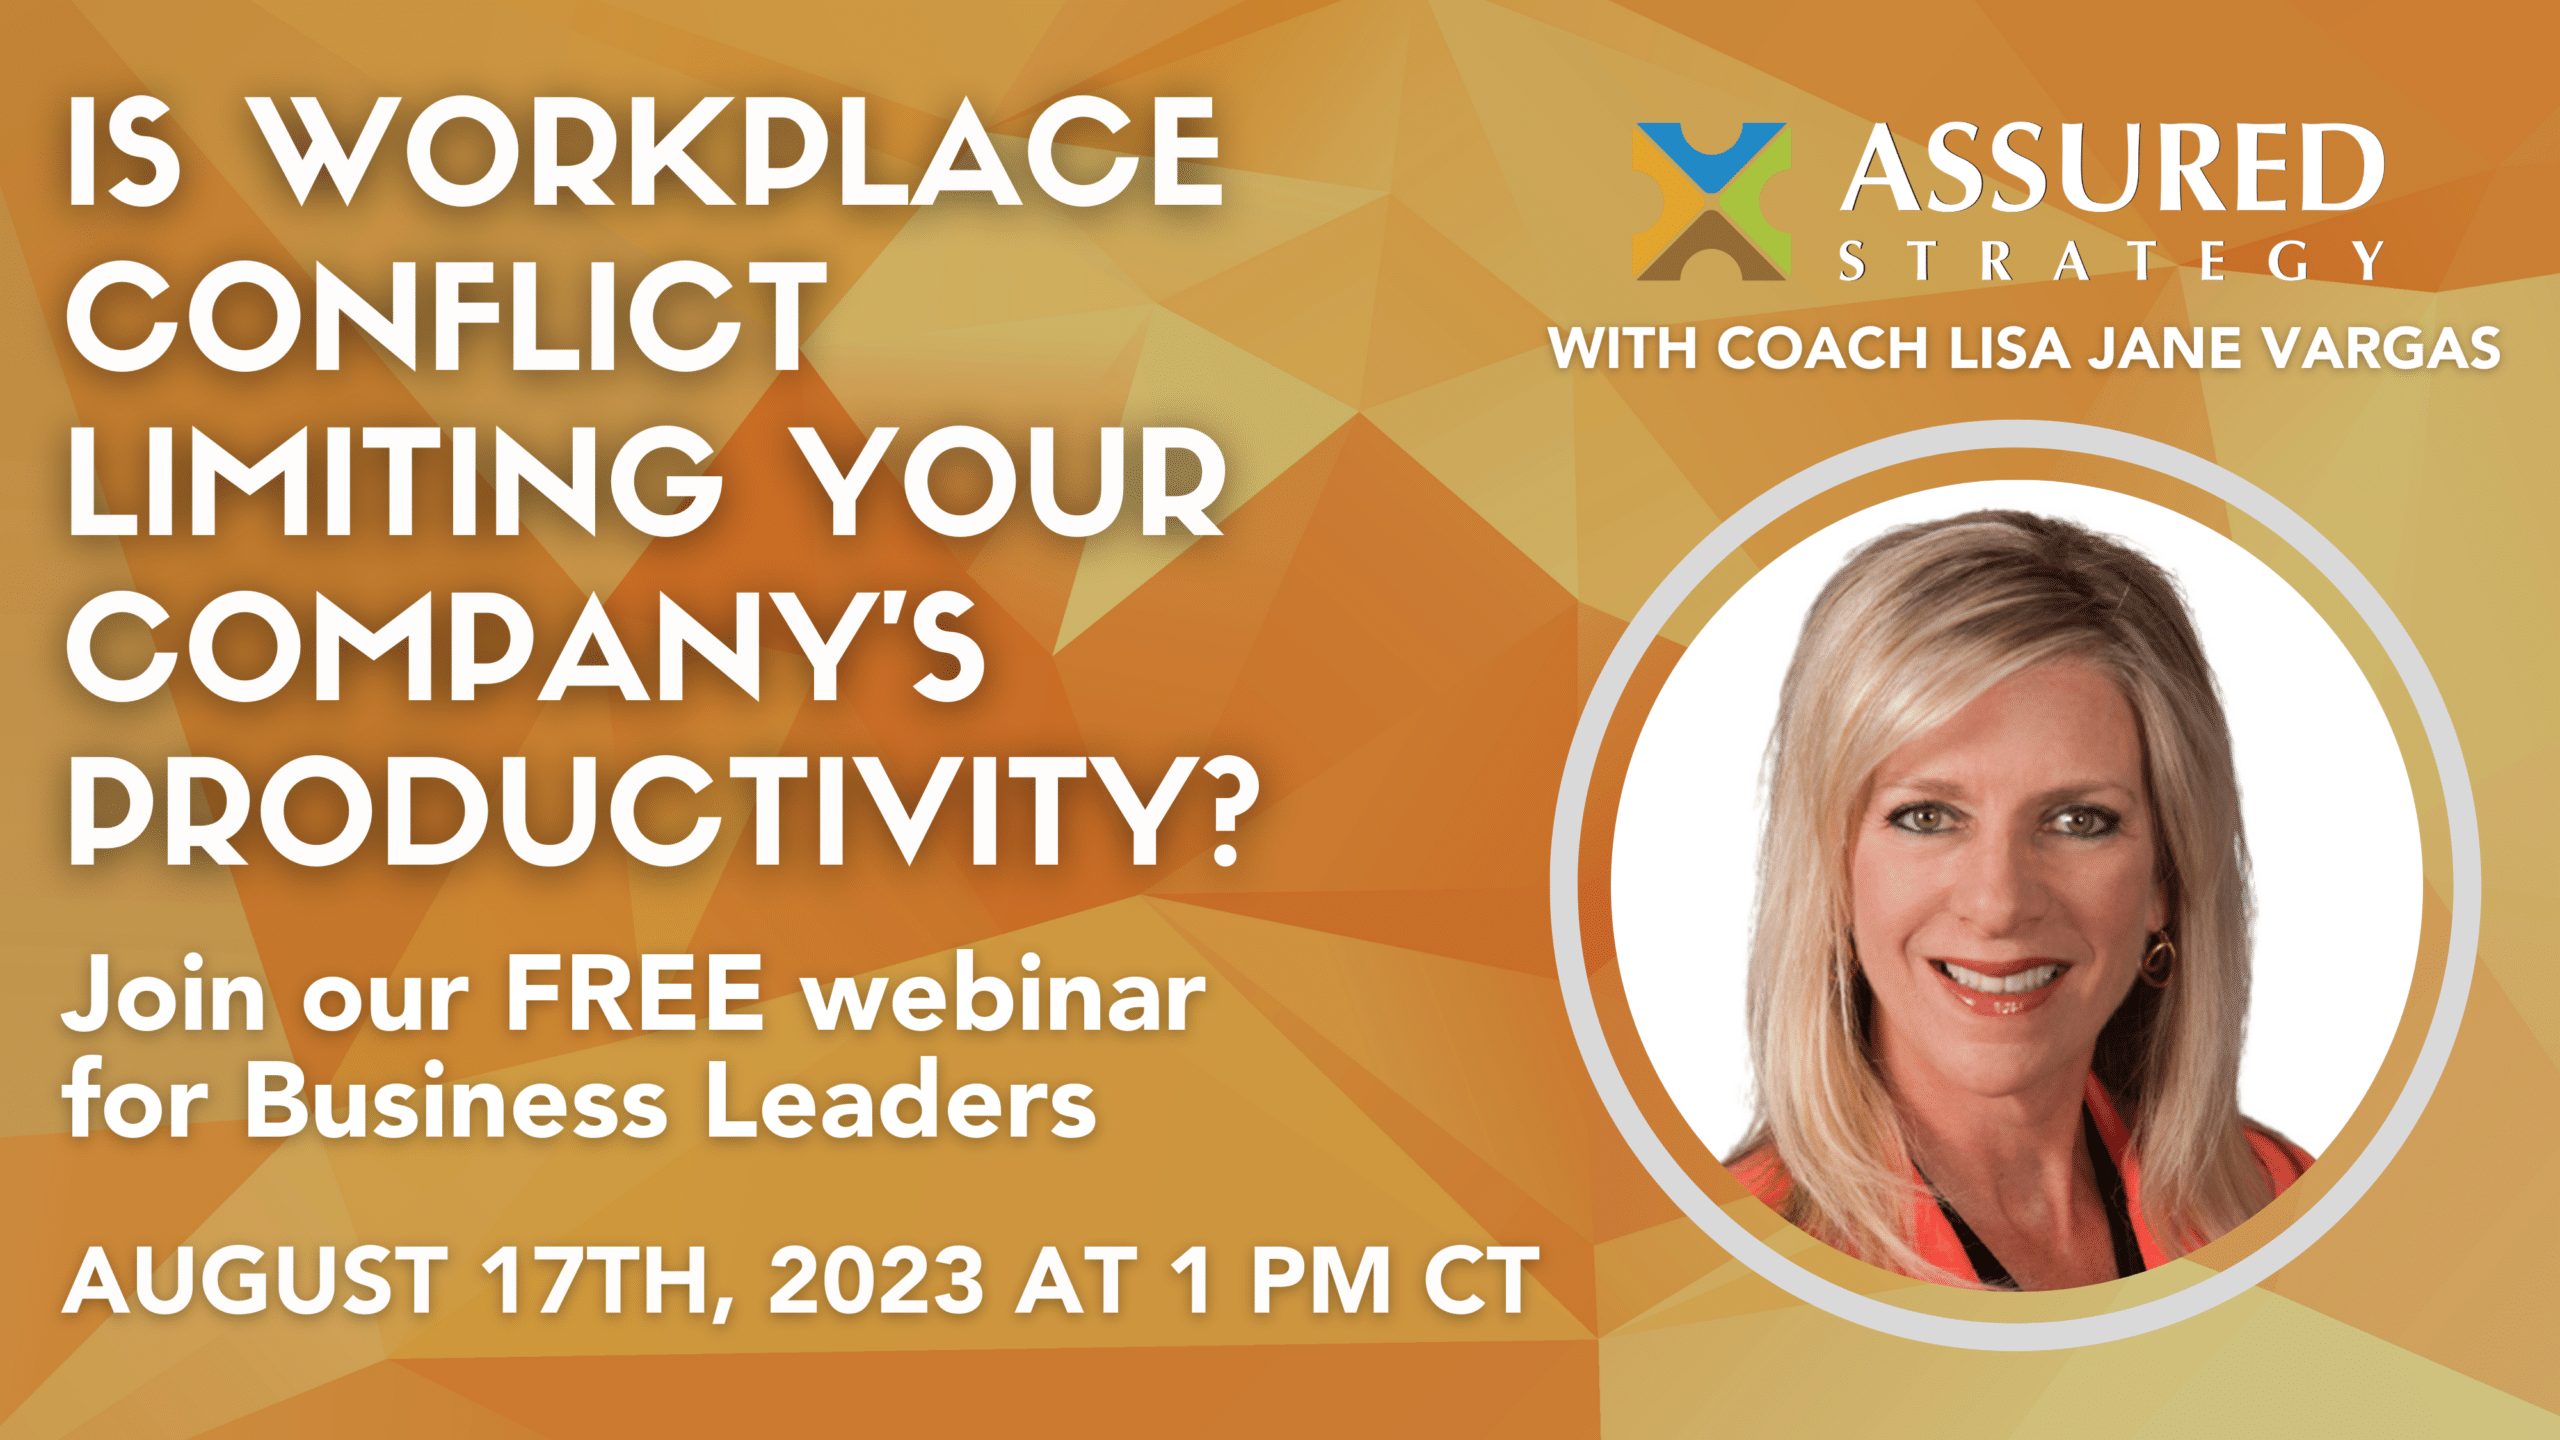 Free Webinar: How to Boost Productivity by Addressing Workplace Conflict – August 17th from 1-2pm CT